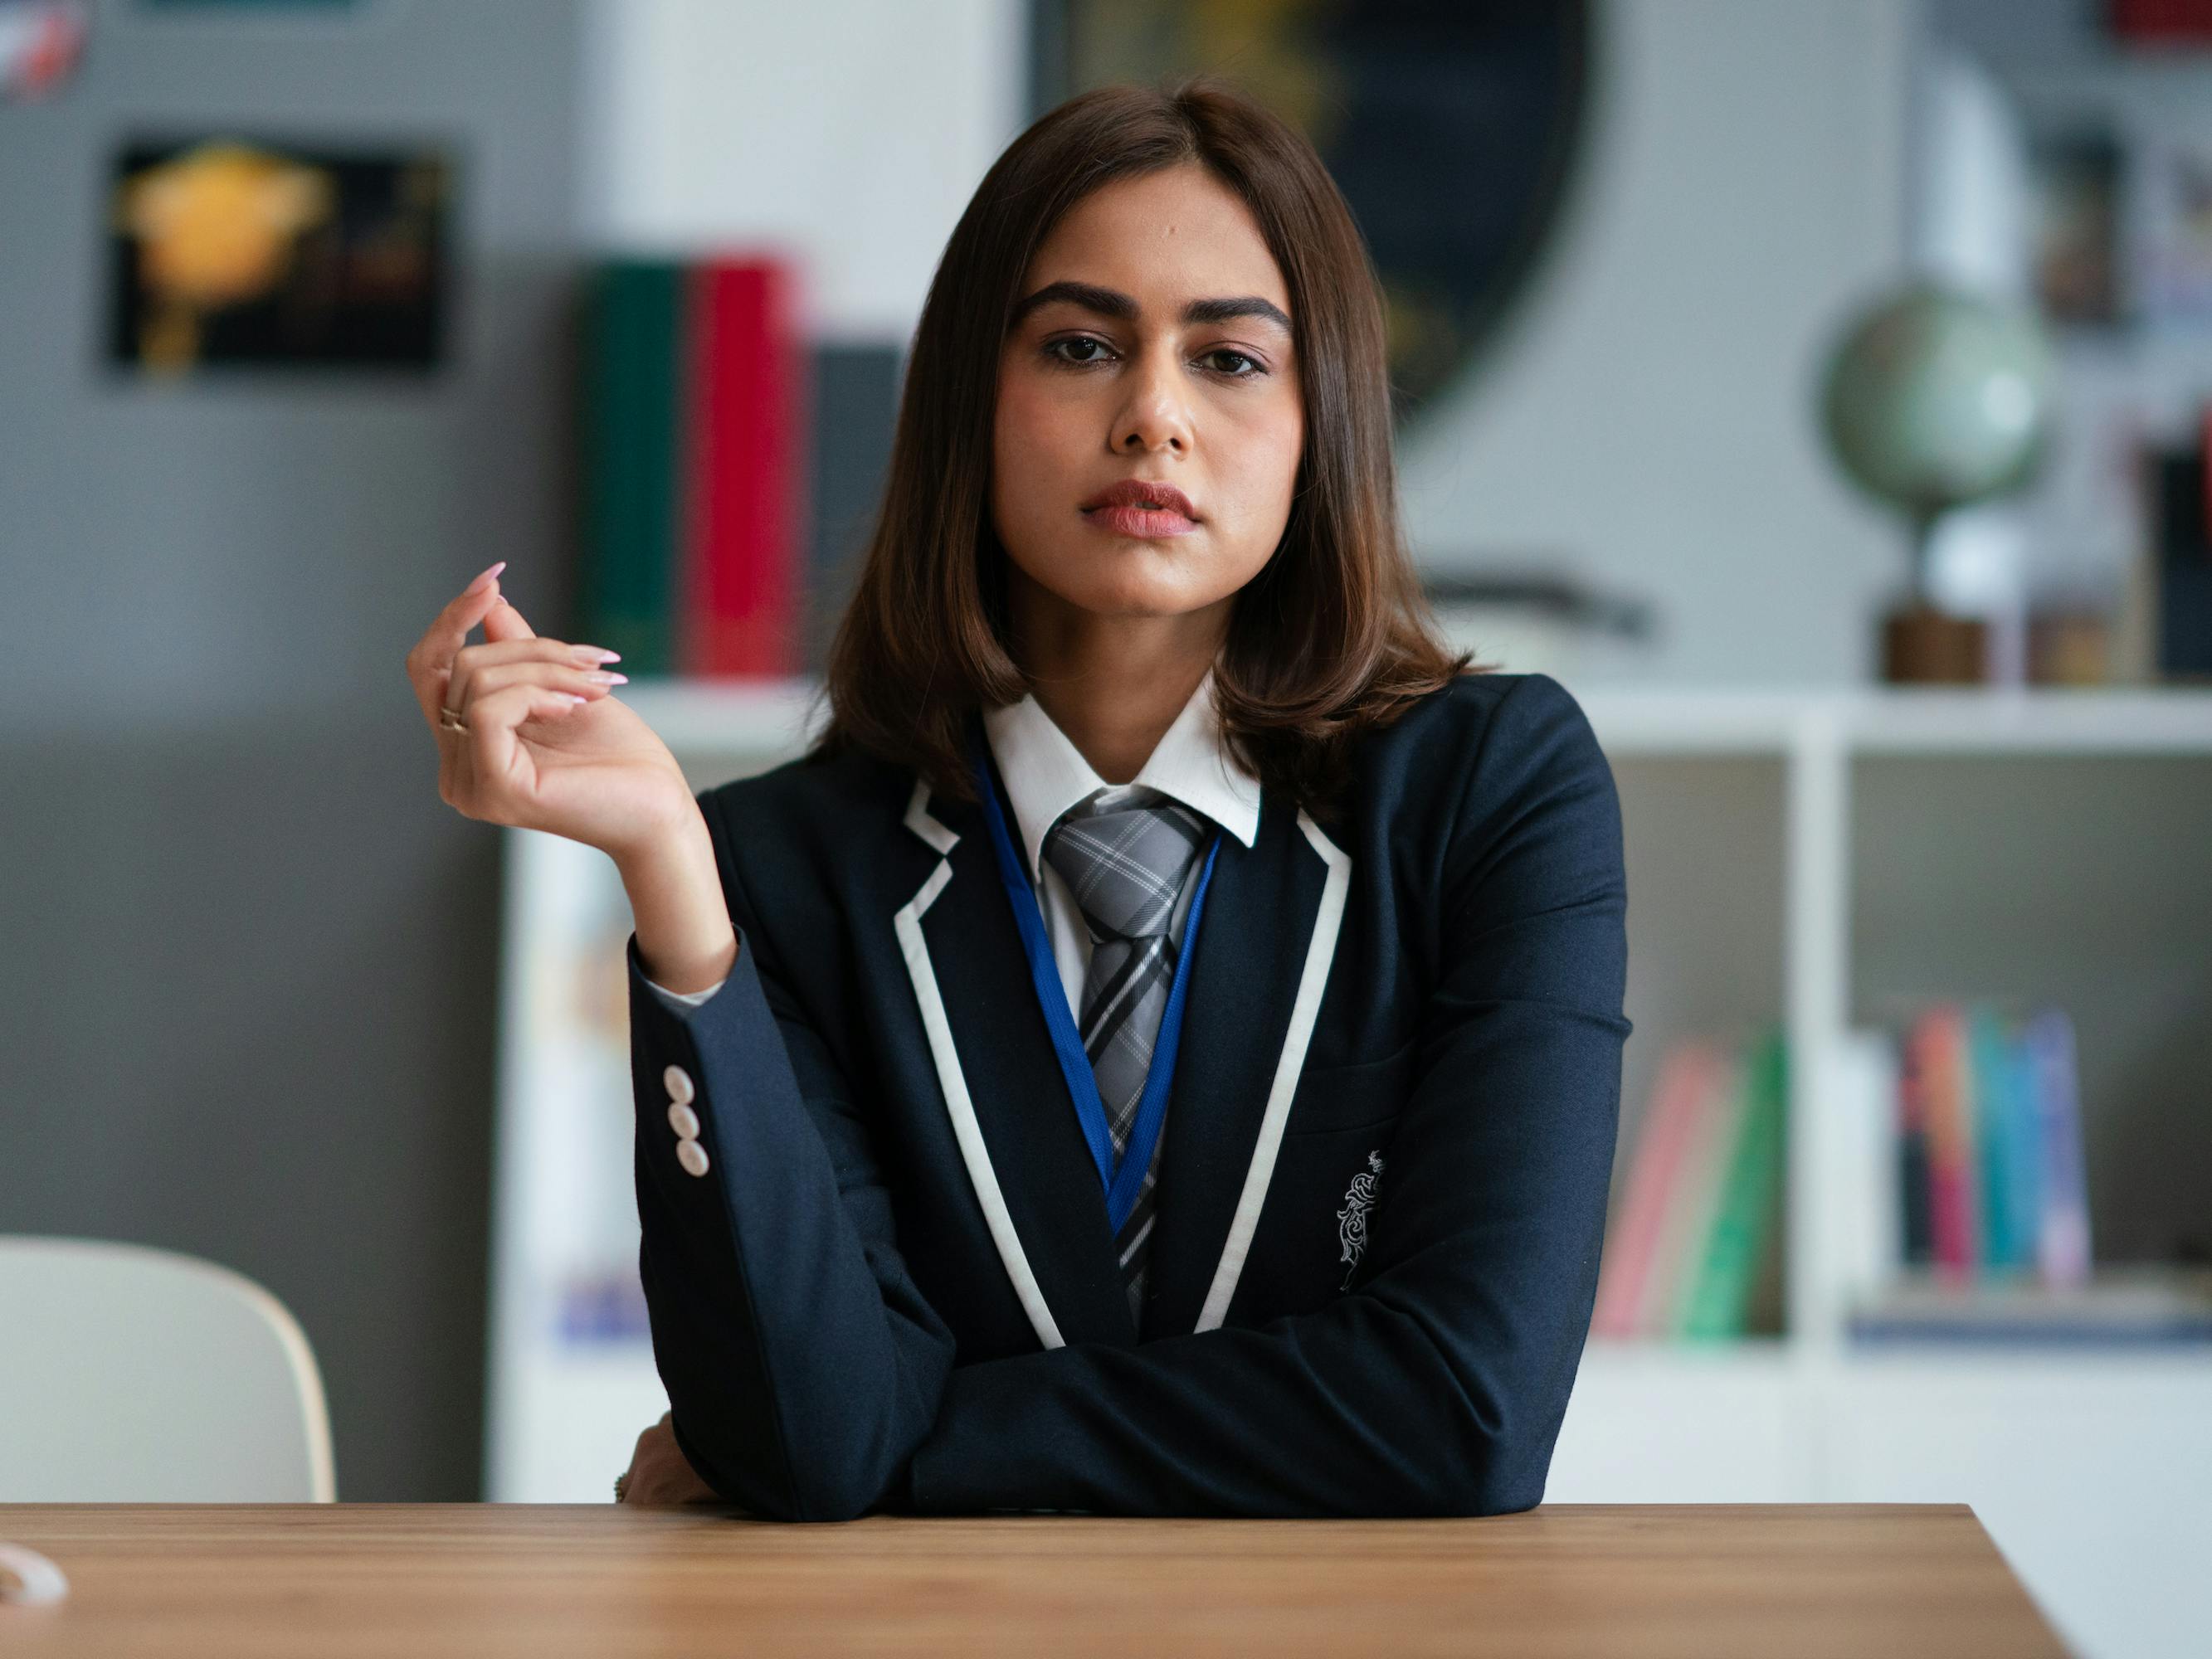 Koel (Naina Bhan) wears her school uniform: a white shirt, grey plaid tie, and navy blazer. She rests her arm on her desk and looks at the camera with attitude. 